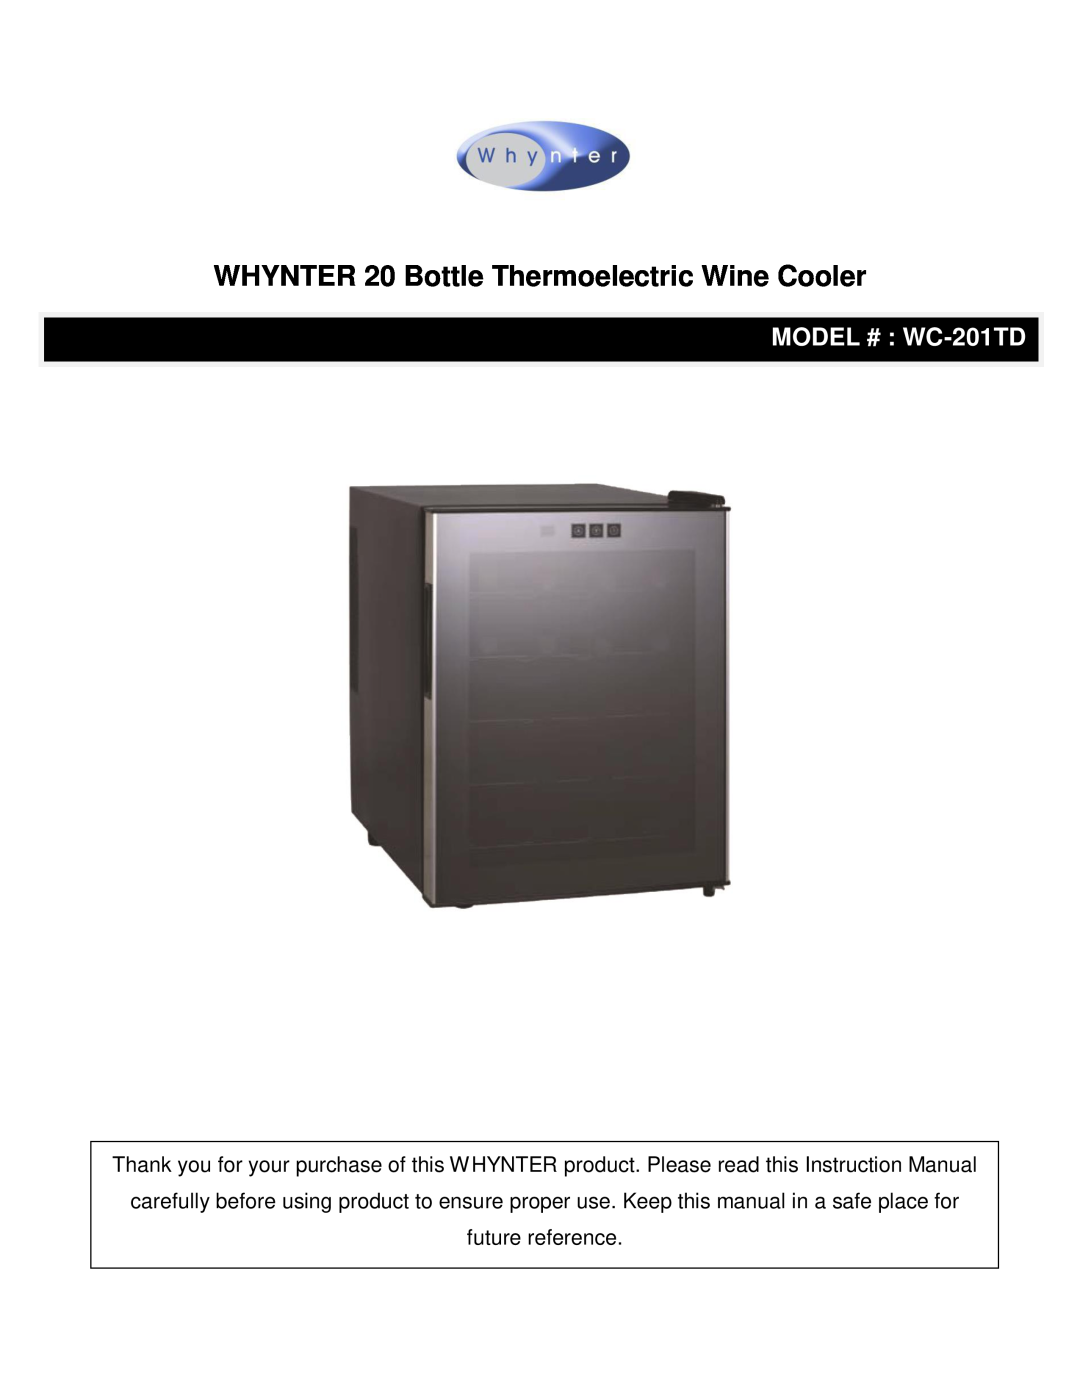 Whynter wc-201td instruction manual WHYNTER 20 Bottle Thermoelectric Wine Cooler, MODEL # WC-201TD 